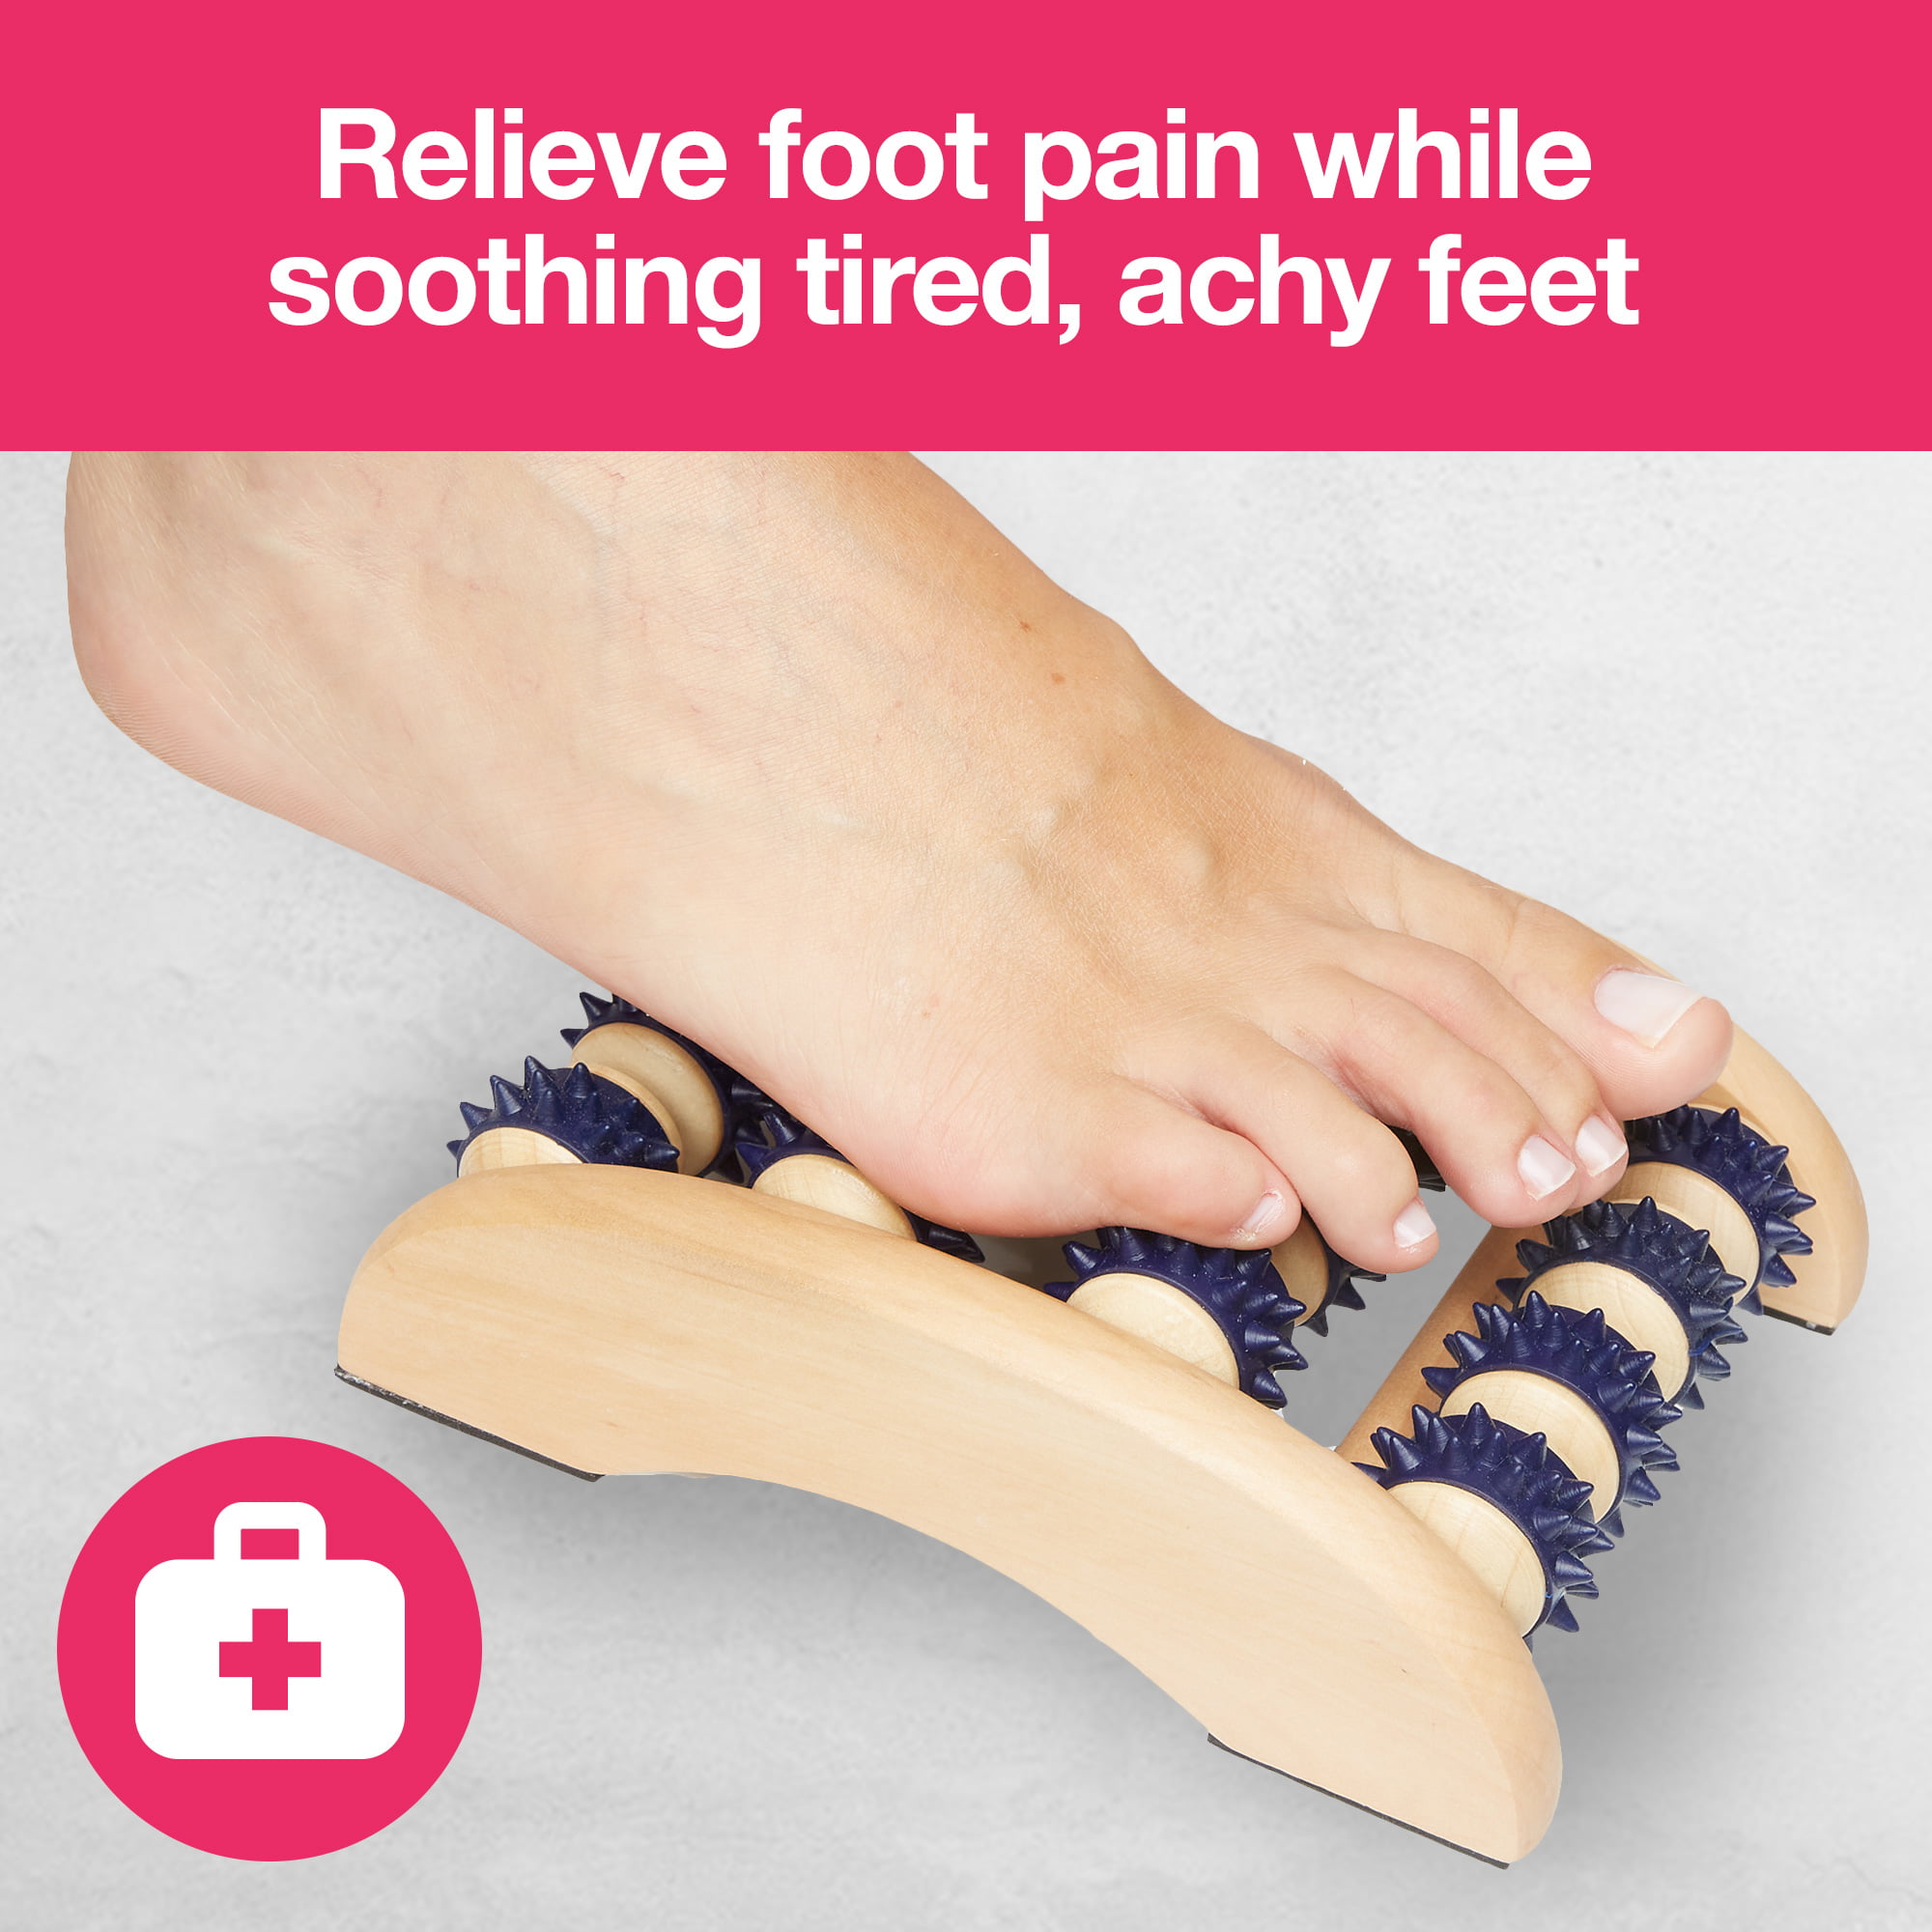 10 Best Foot Massagers to Soothe Aching Feet, According to Experts